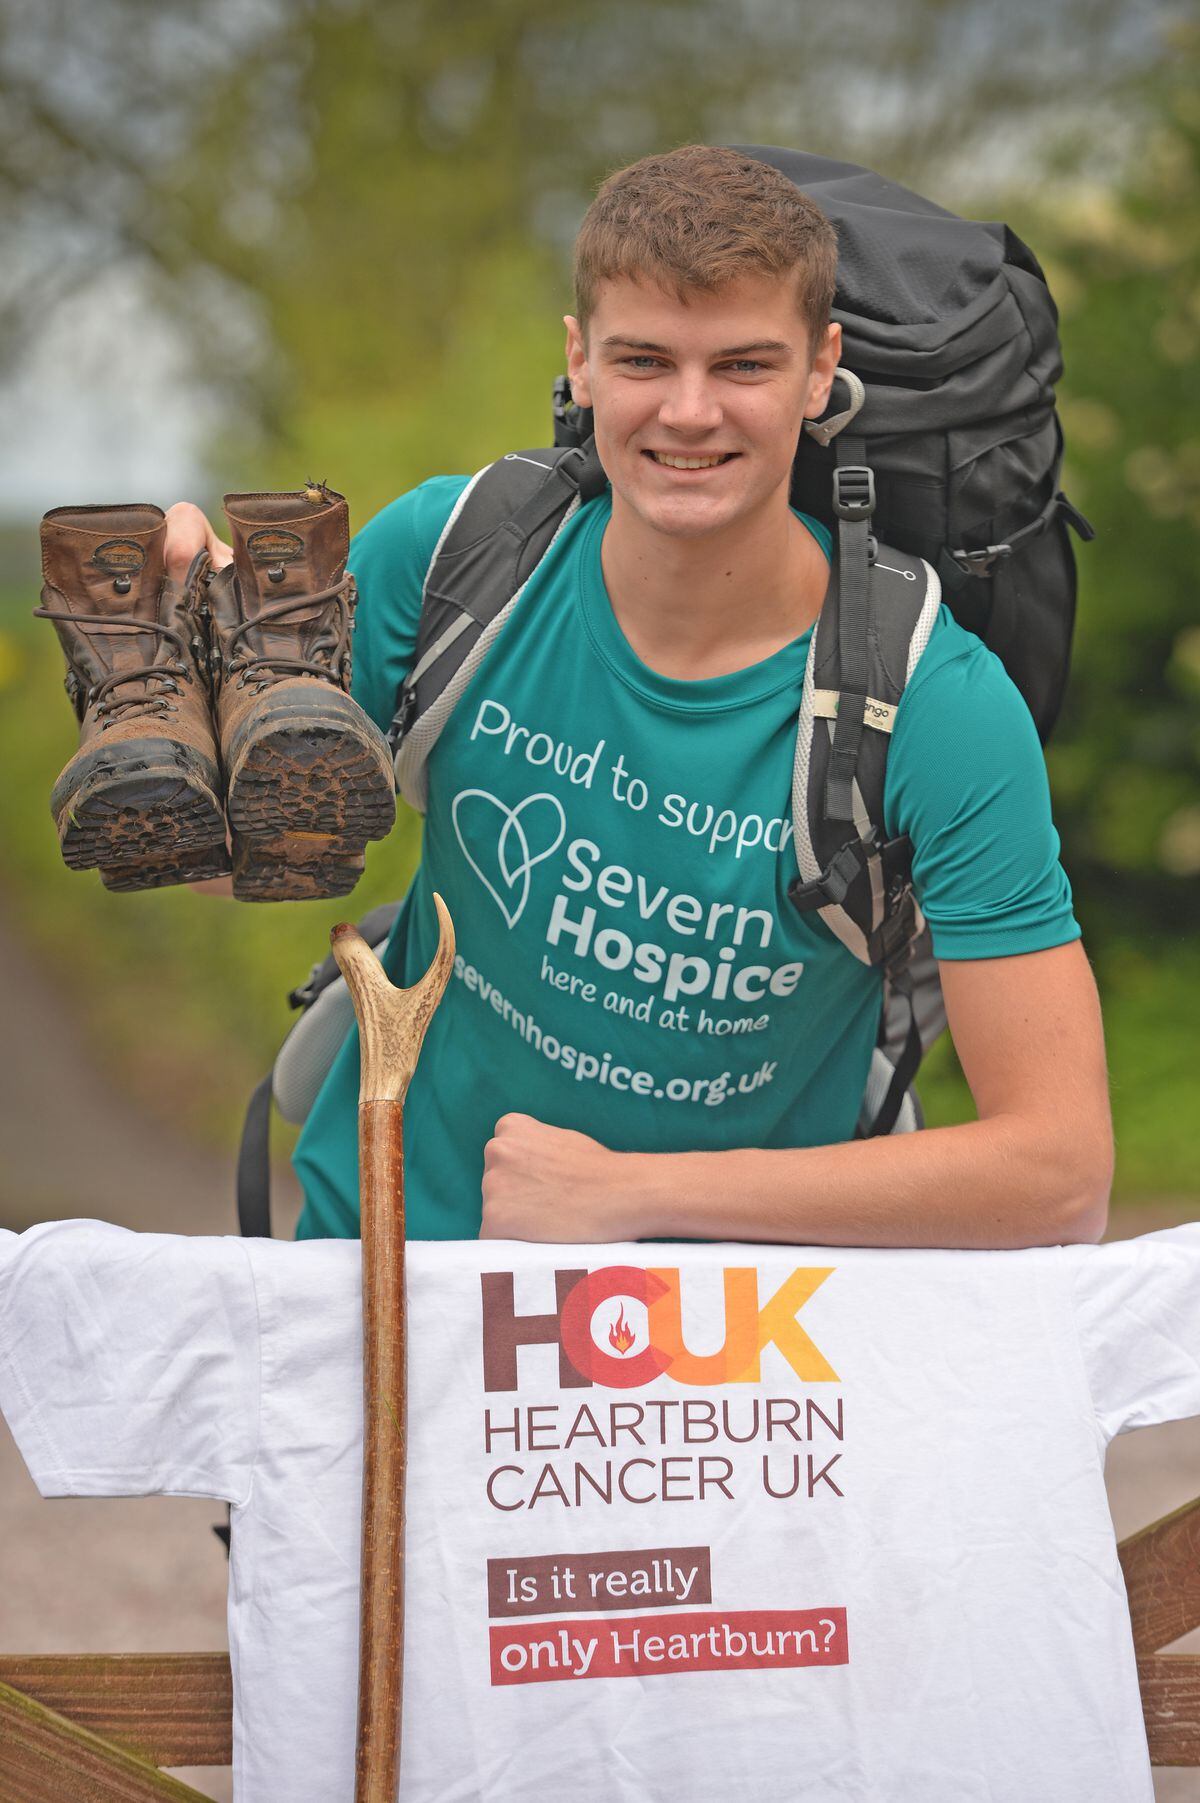 Tobias is raising money for two charities – Severn Hospice and Heartburn Cancer UK